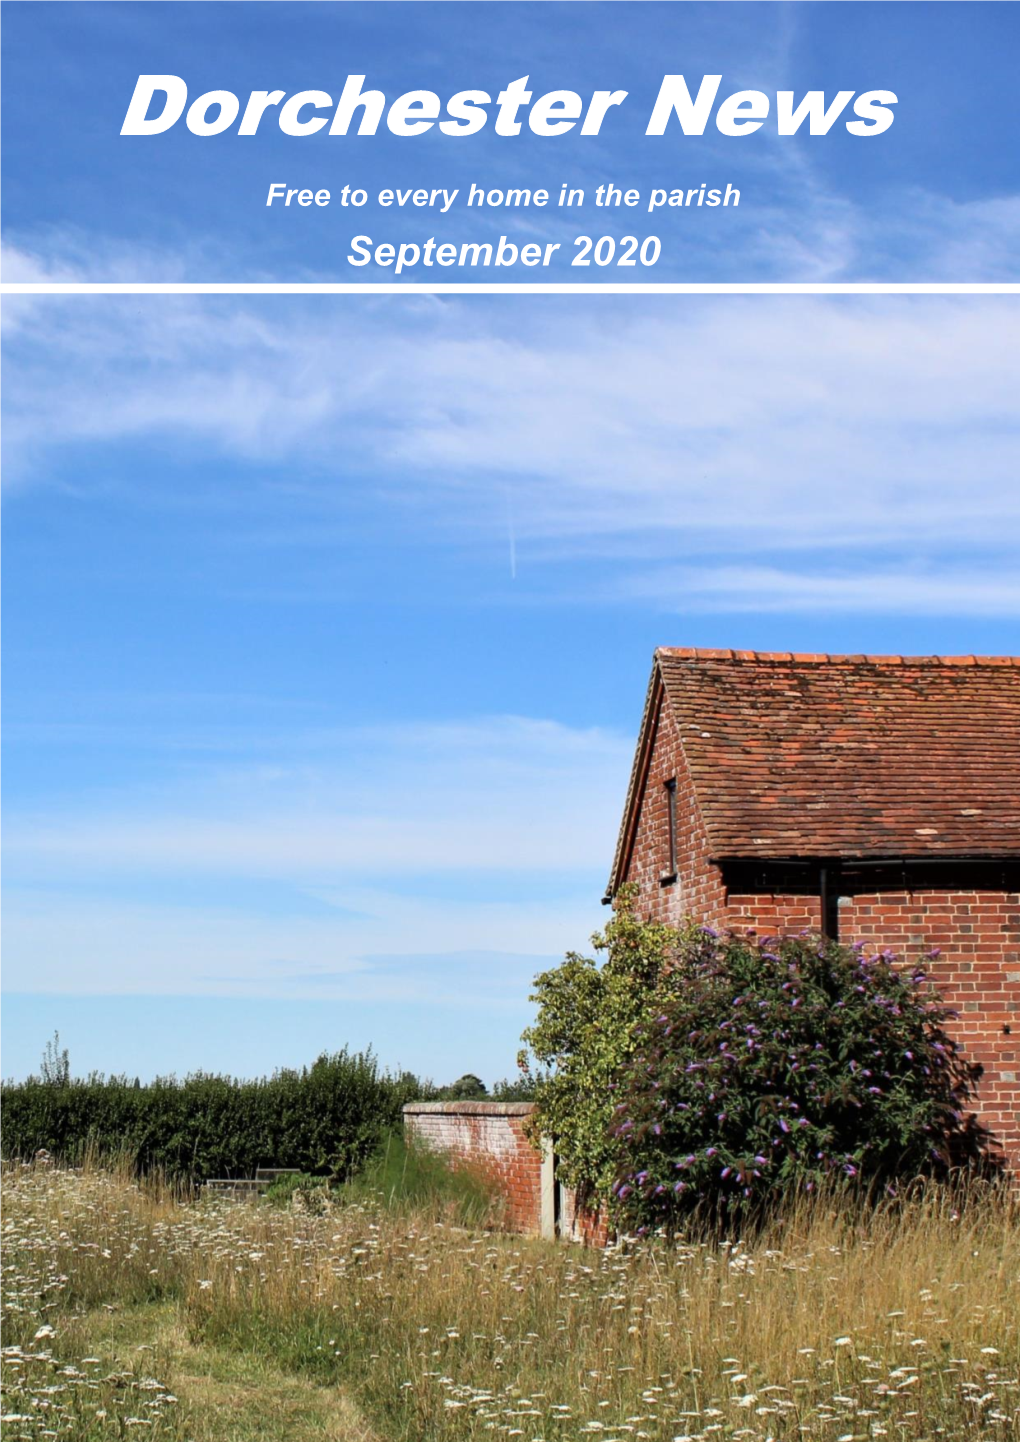 Dorchester News Free to Every Home in the Parish September 2020